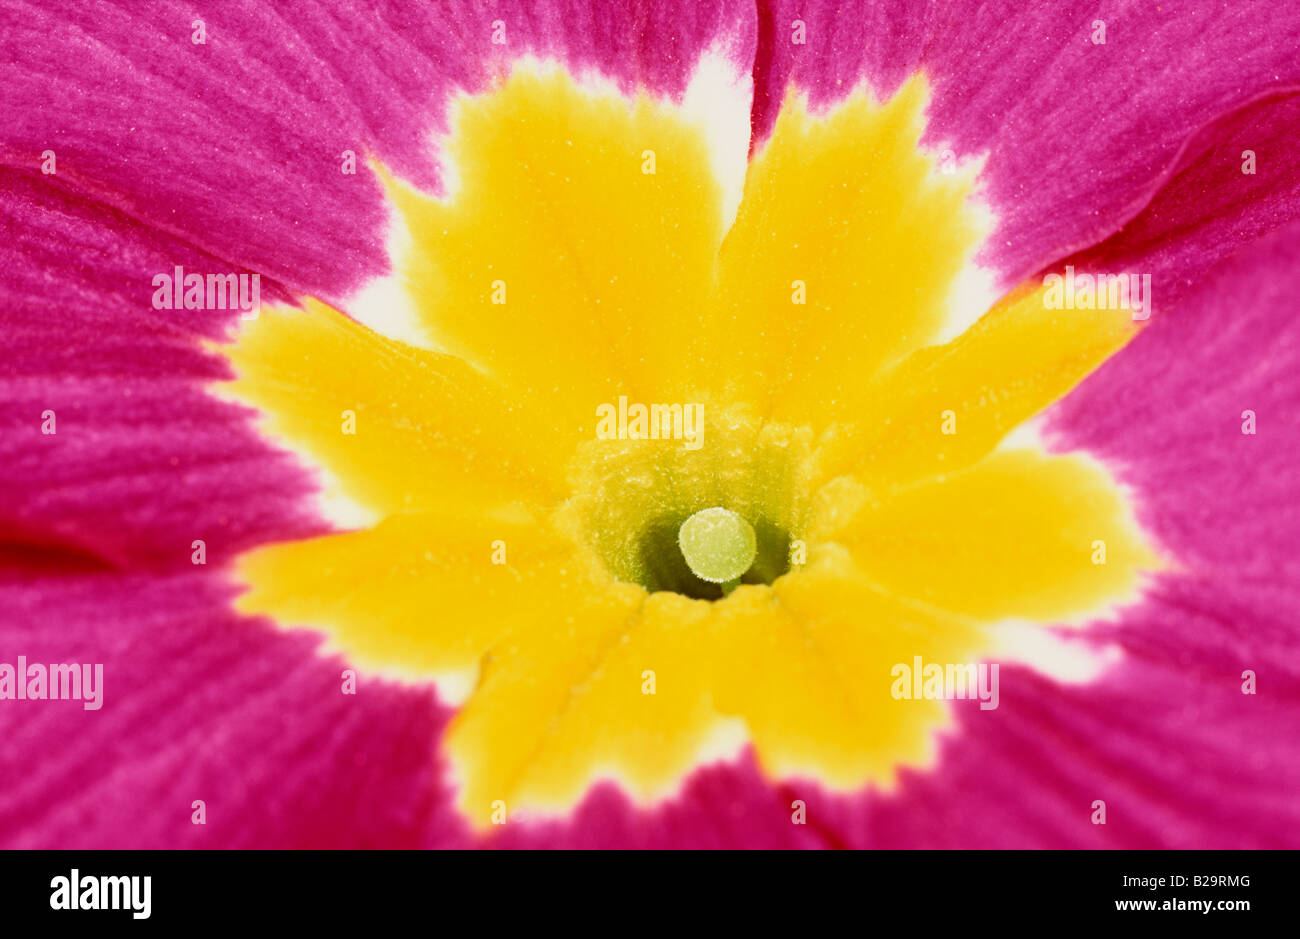 Center of Red and Yellow Primula Flower Stock Photo